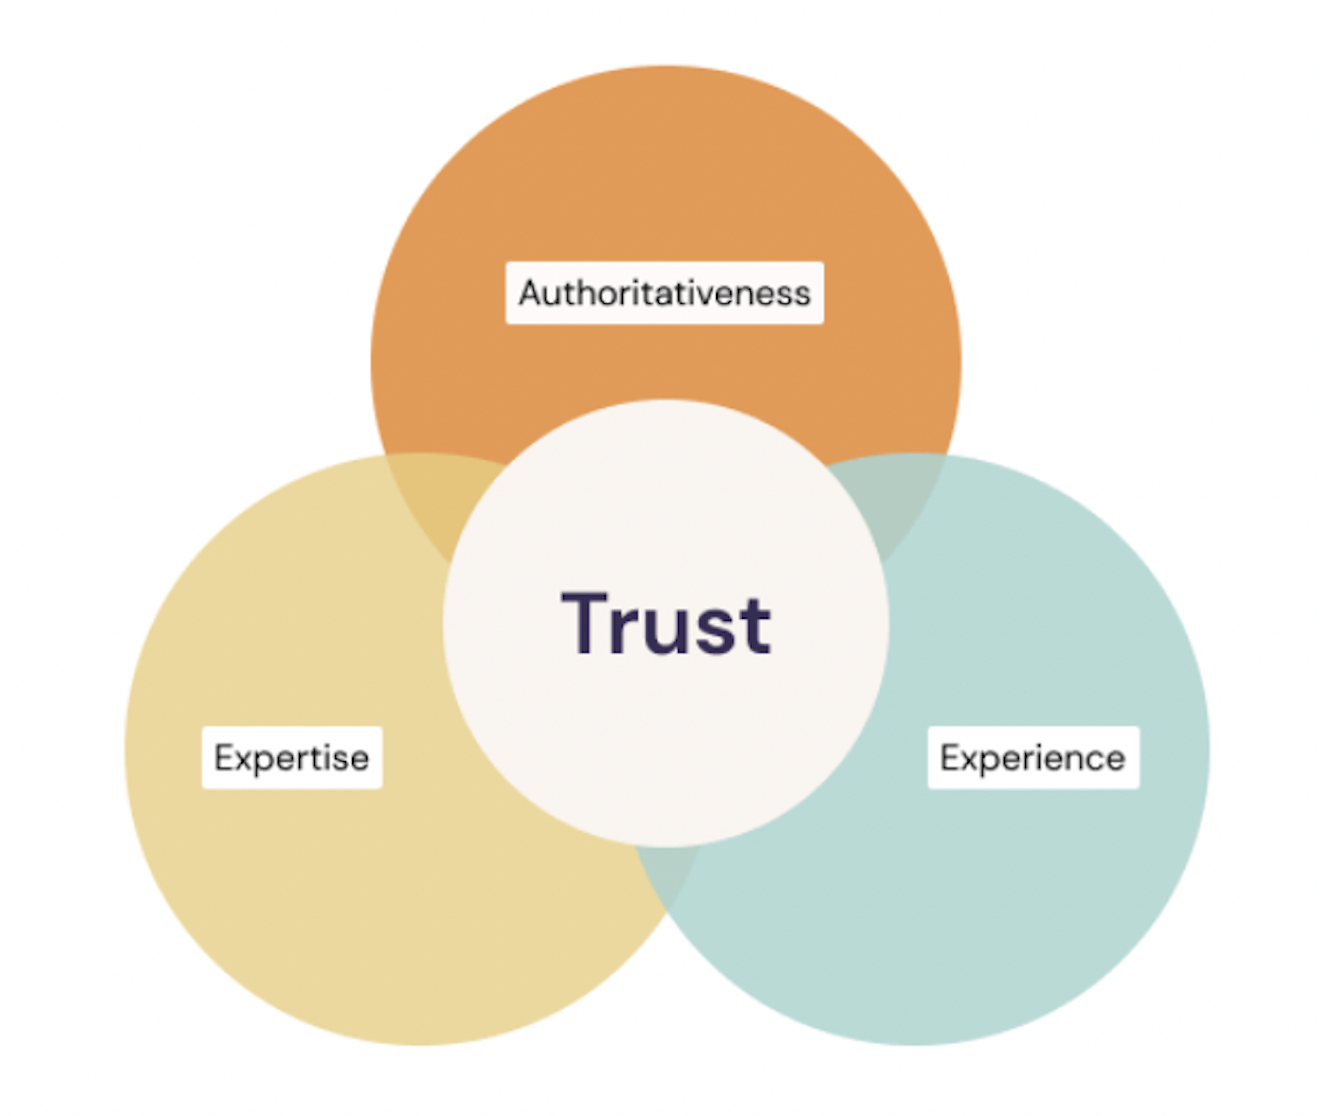 A Venn diagram with Authoritativeness, Experience, and Expertise on the outside, and Trust in the center.